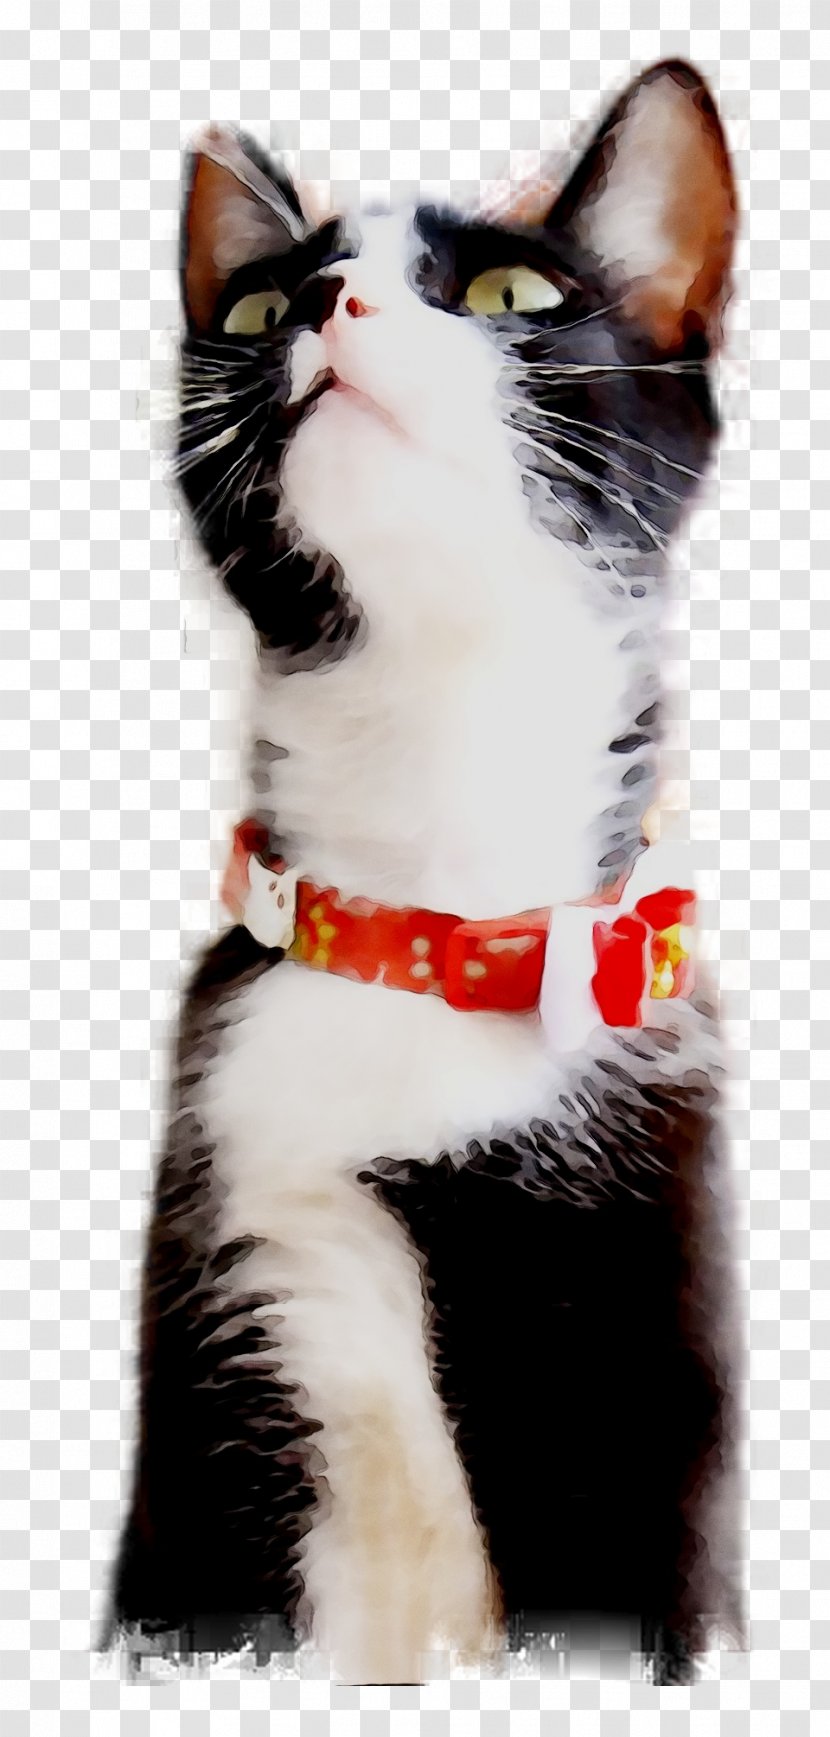 European Shorthair Whiskers American Wirehair Domestic Short-haired Cat Dog - Paw - Snout Transparent PNG